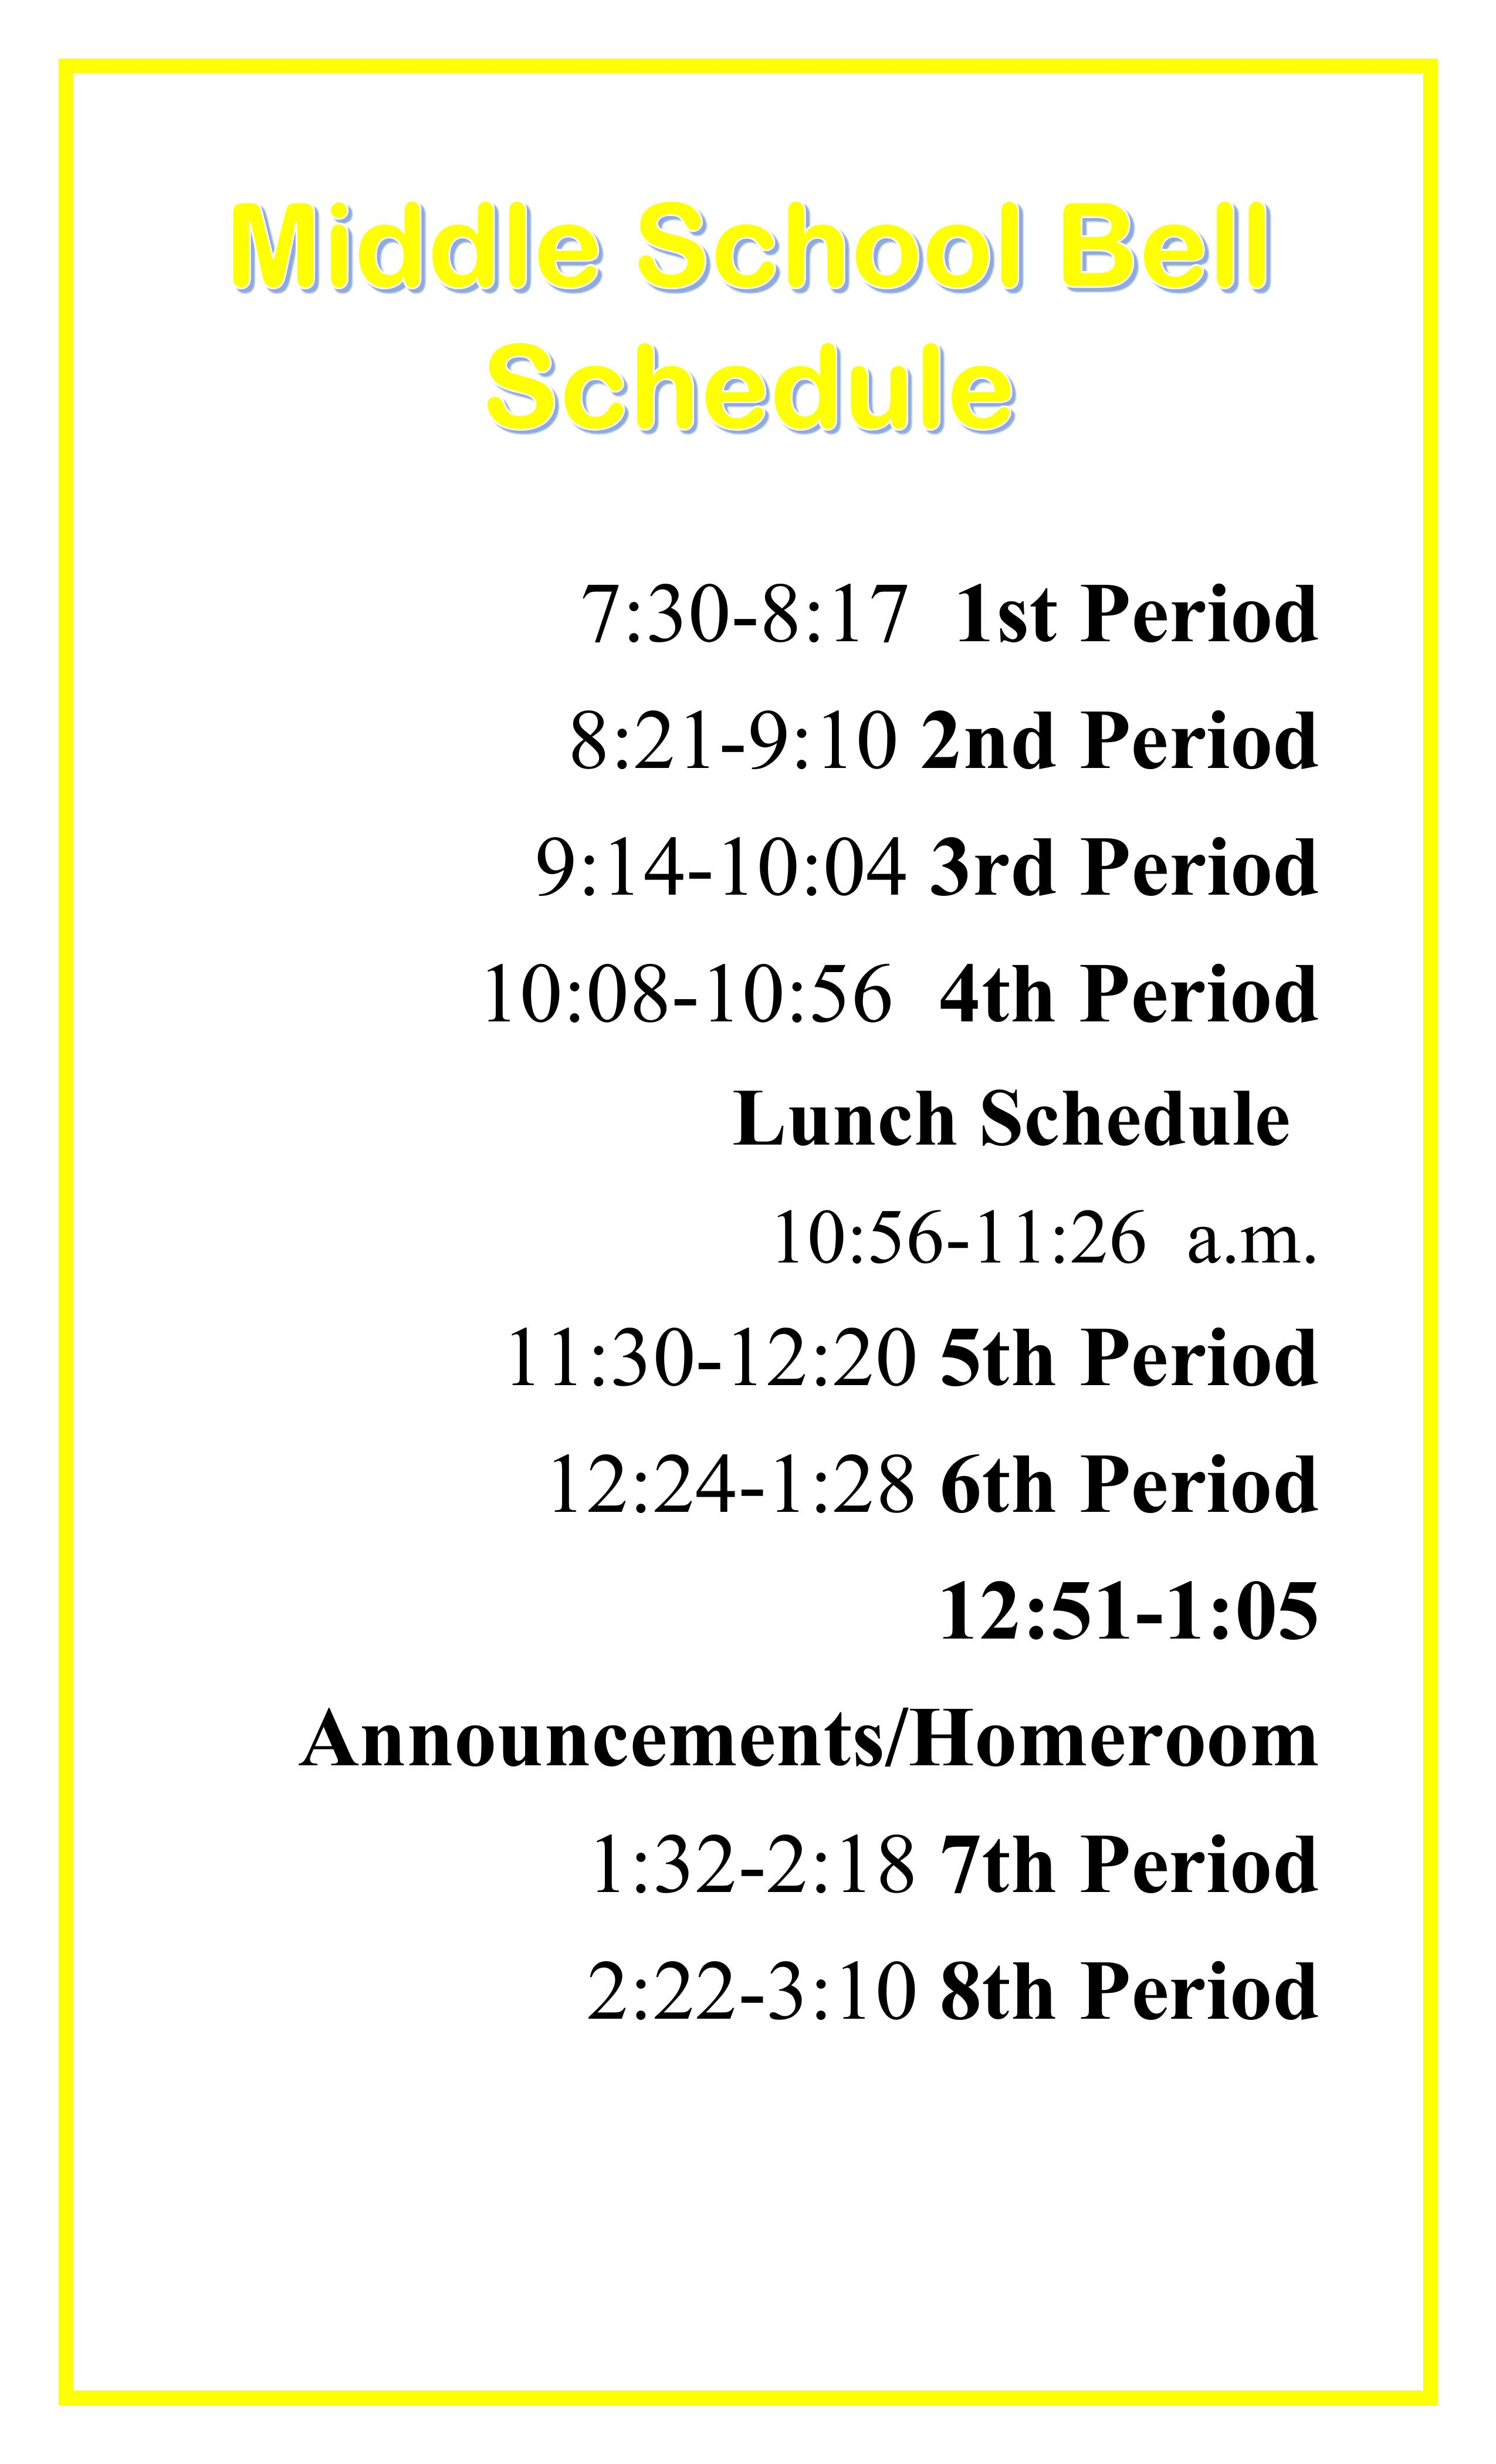 Middle School Bell Schedule Green Oaks Performing Arts Academy